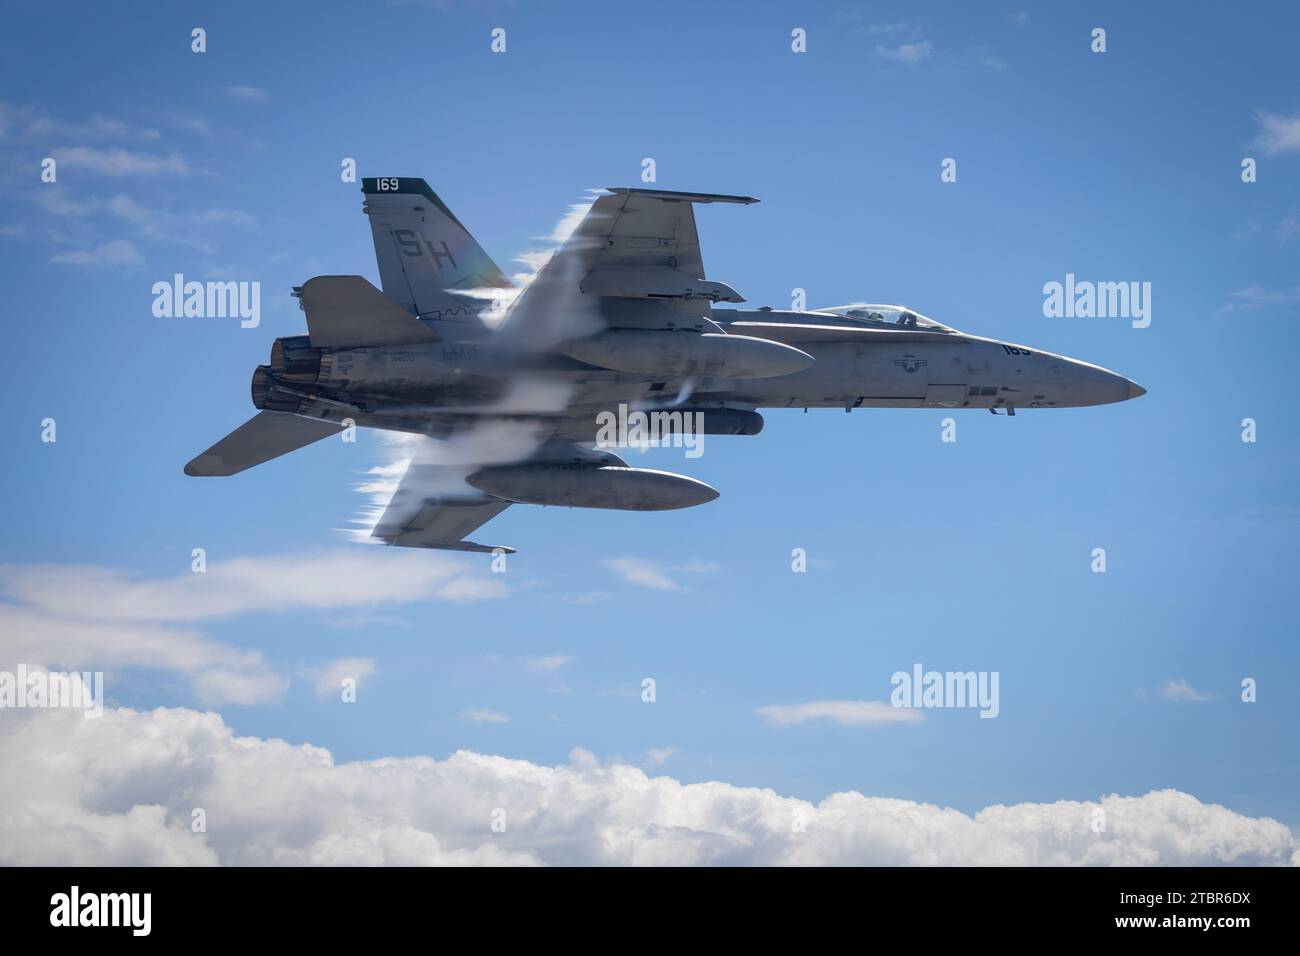 A US Marine F-18 Hornet of the Marine Air Ground Task Force (MAGTF), with vapor break around the aircraft, at America's Airshow 2023 in Miramar, Calif Stock Photo